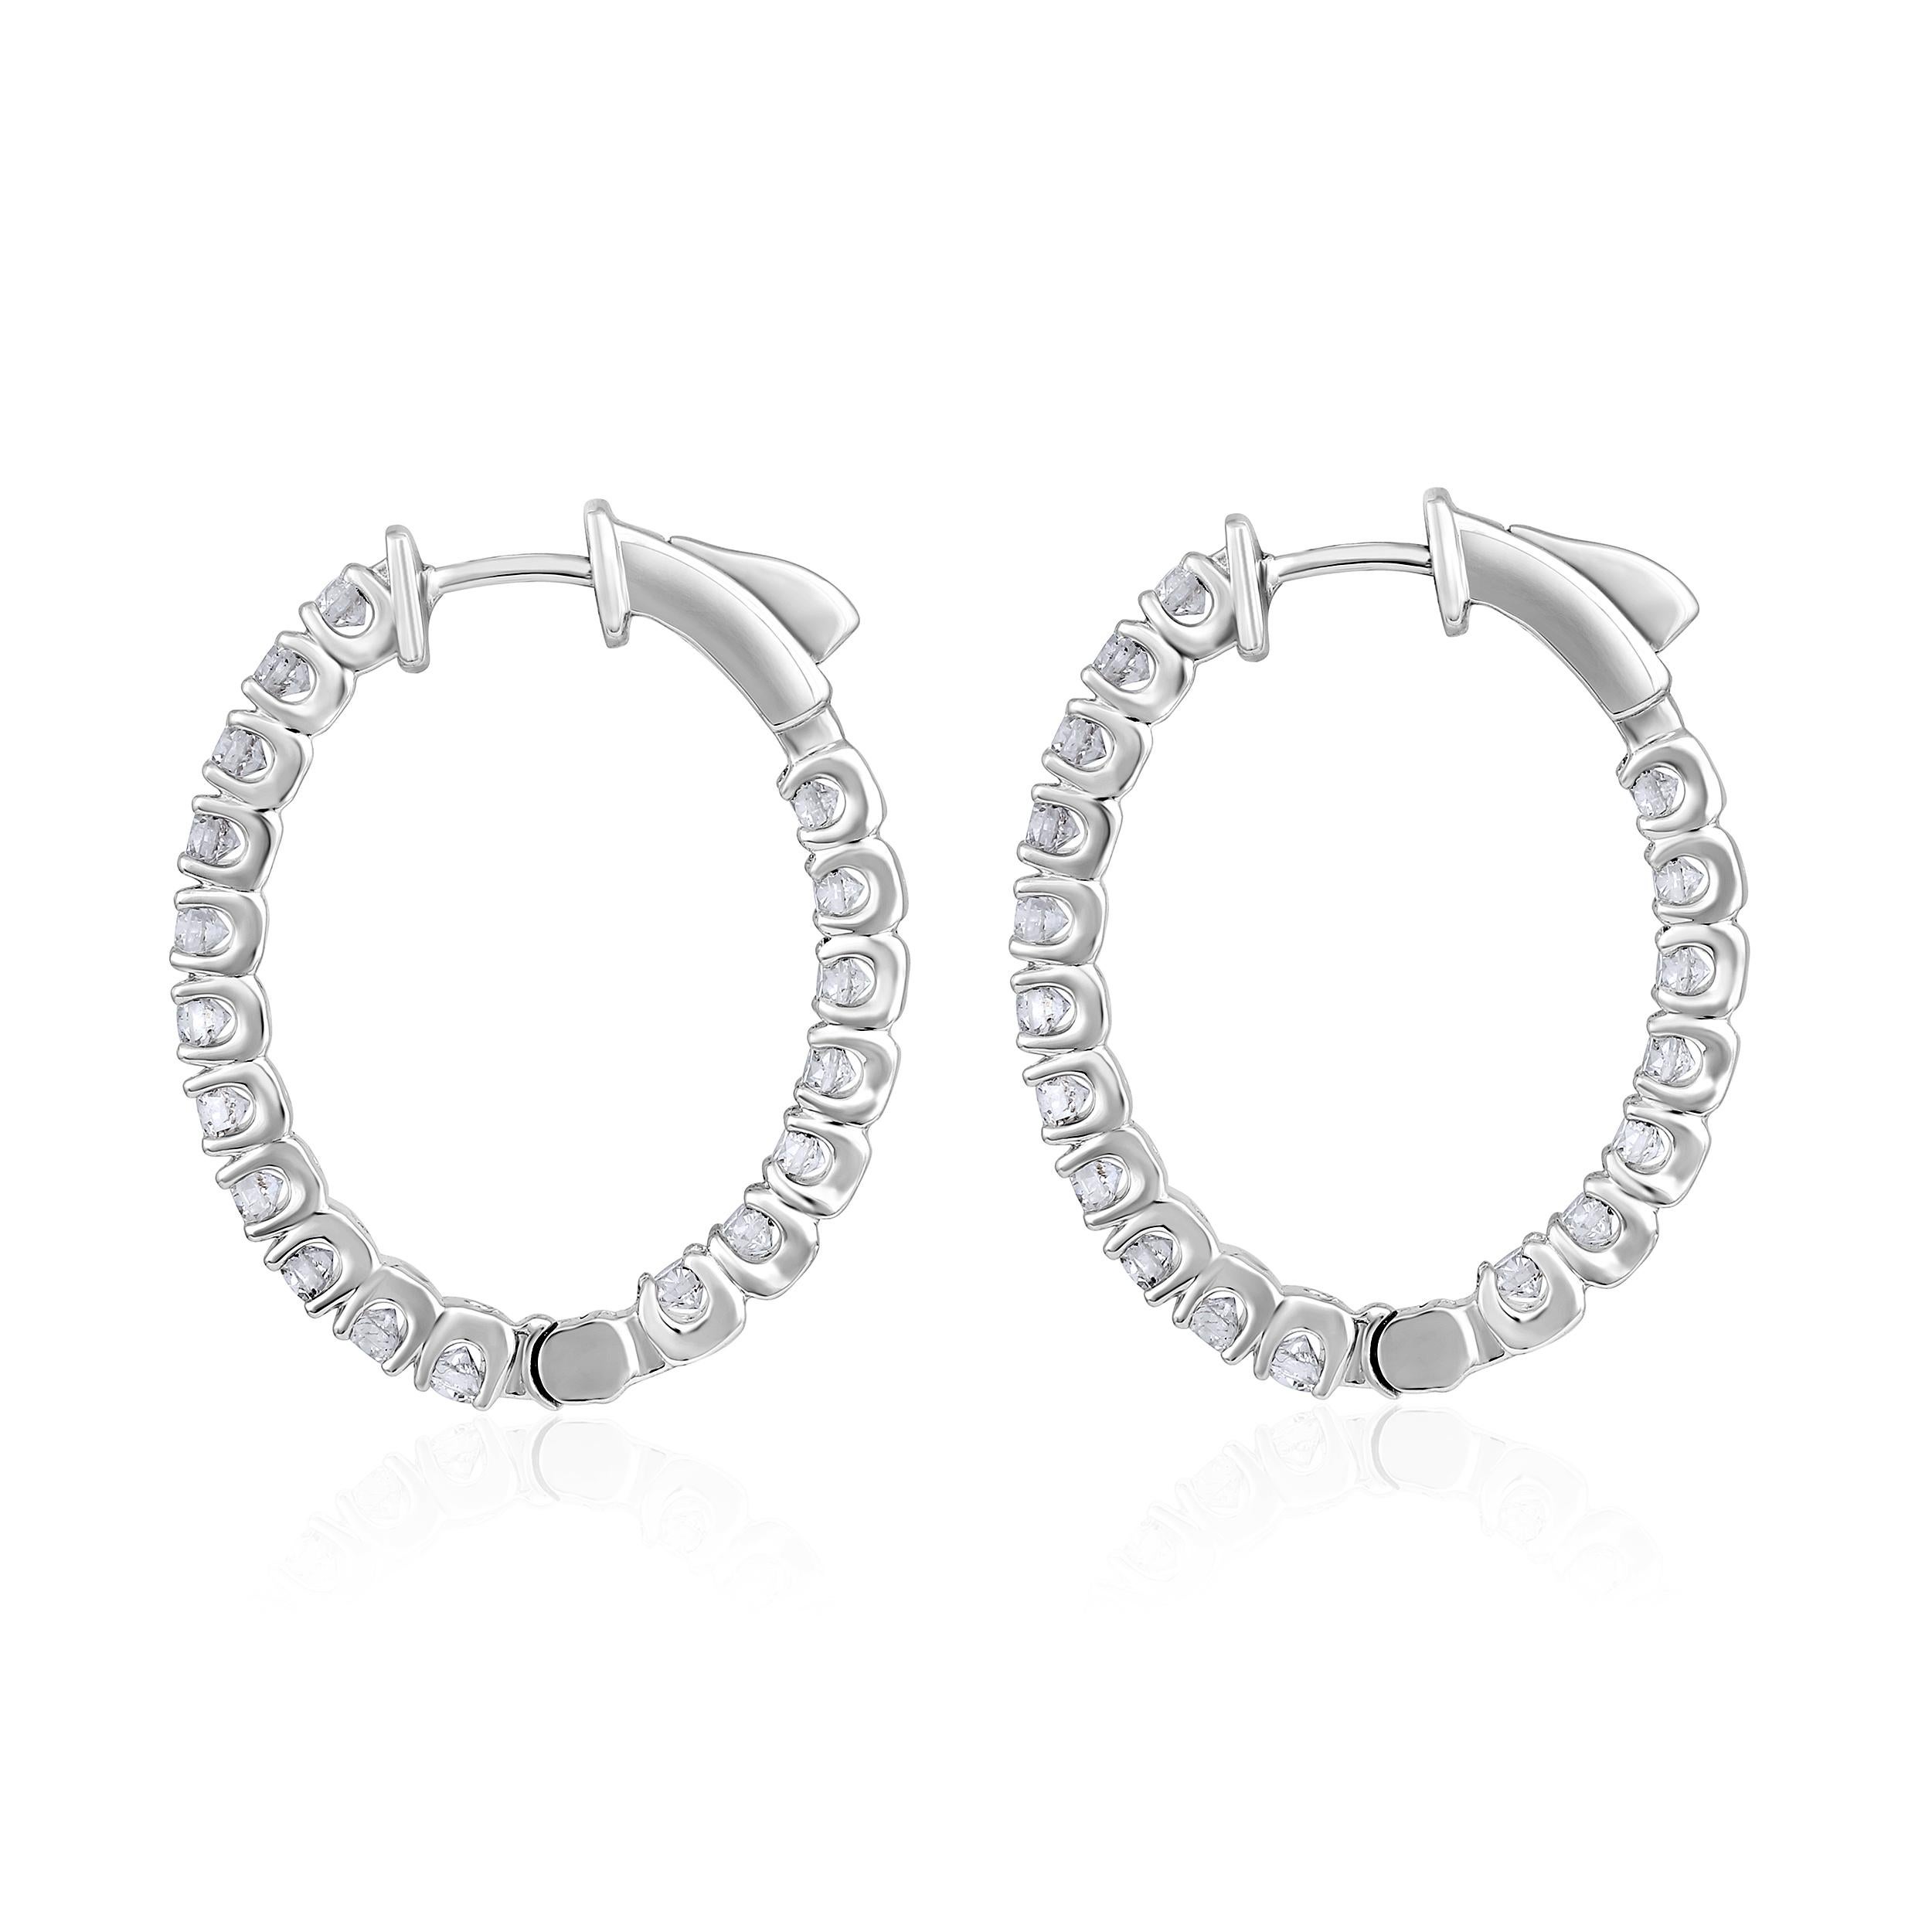 Brilliant Cut Certified 14k Gold 2 Carat Natural Diamond Oval Inside Out Hoop White Earrings For Sale